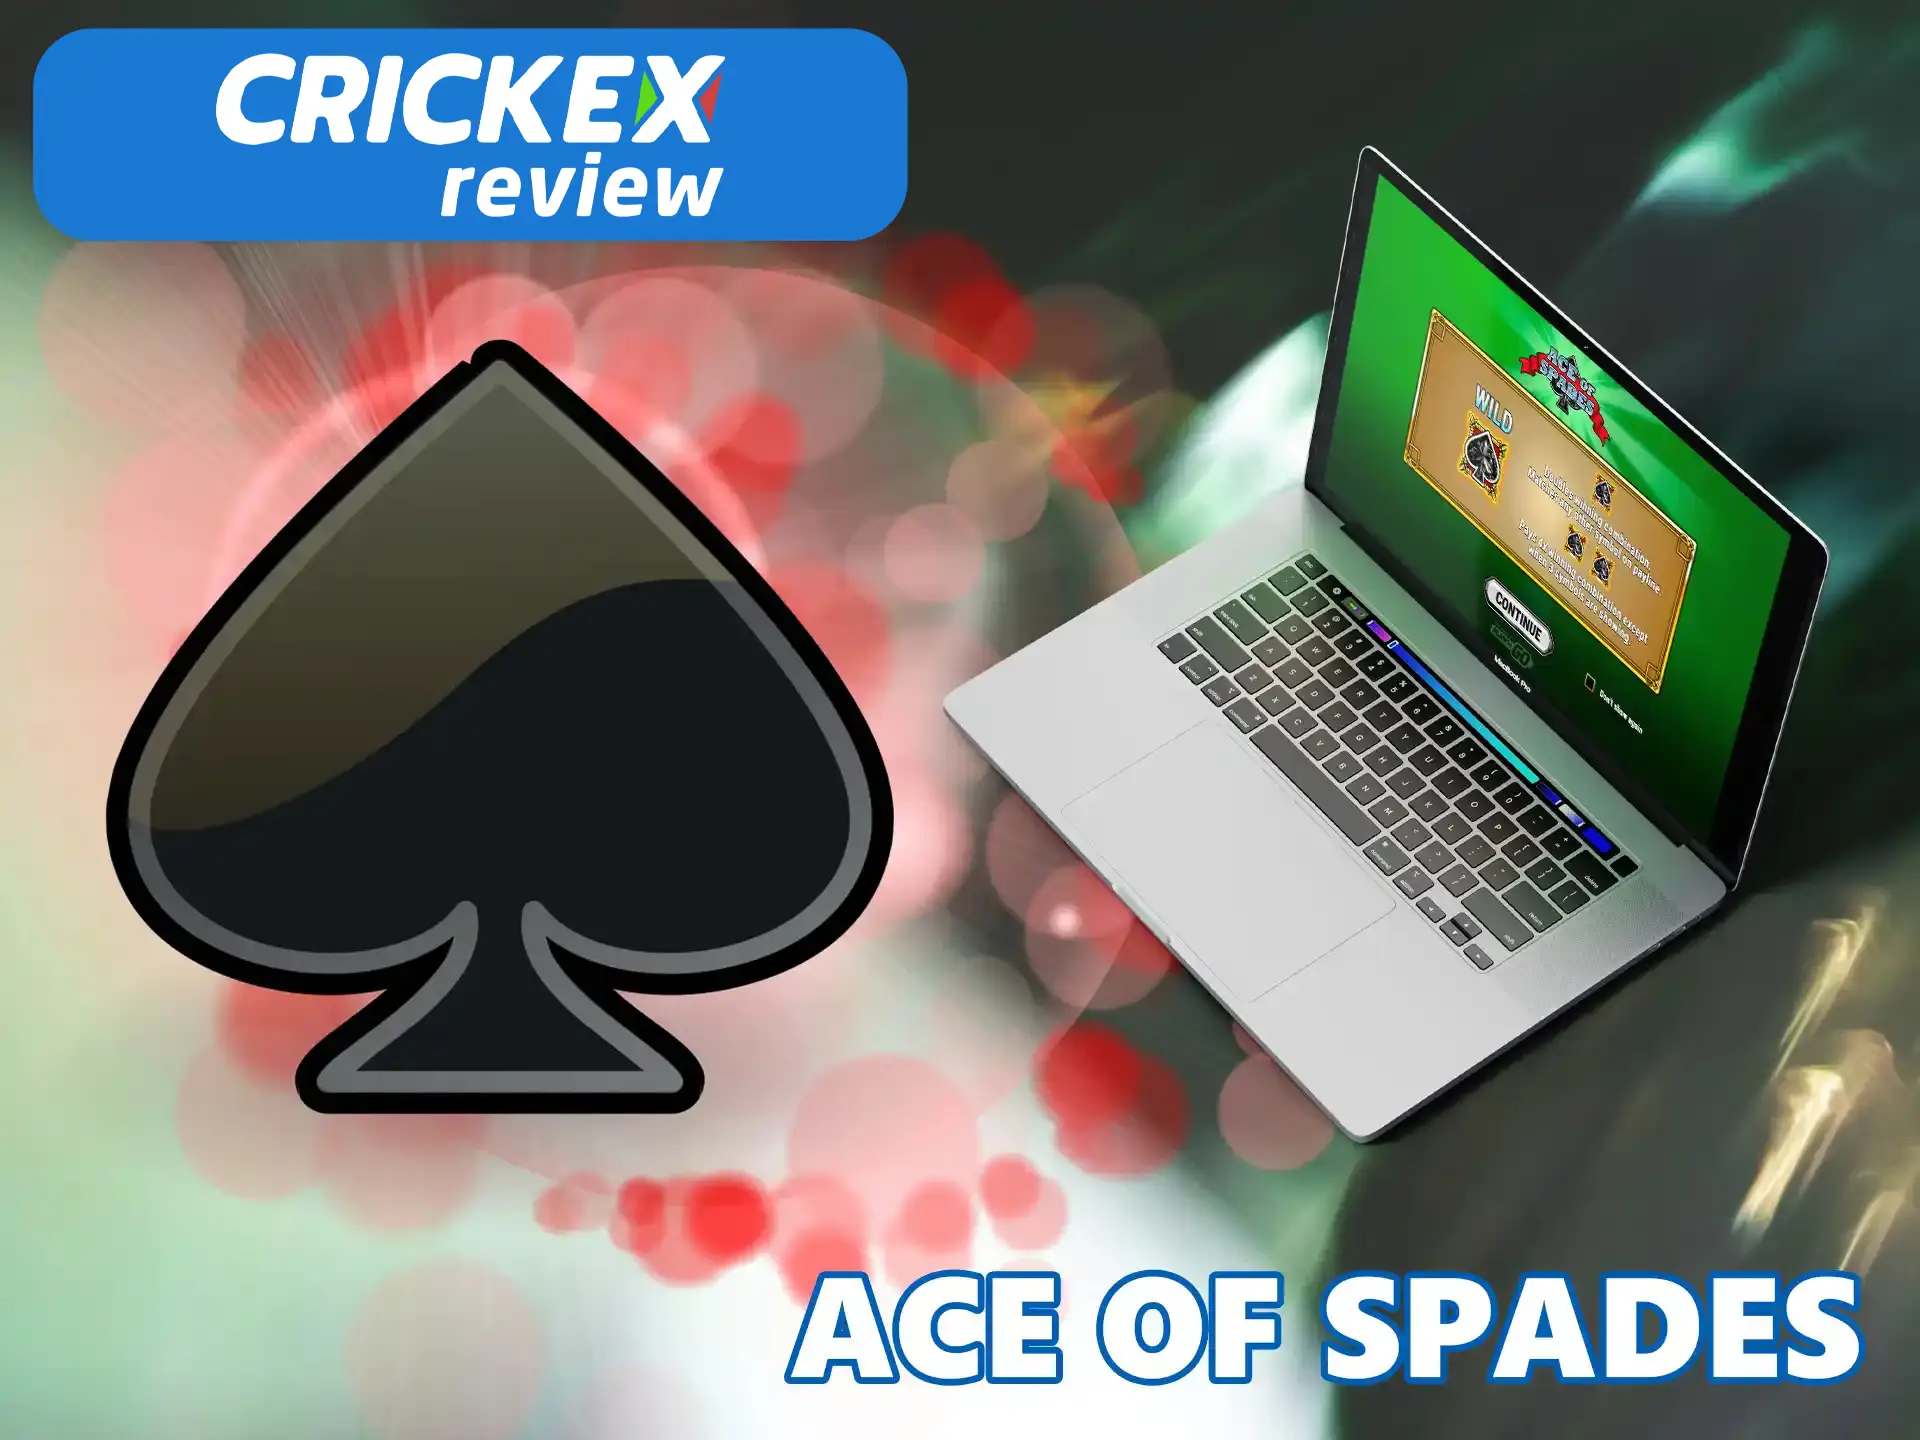 The spades icon allows players to win big on the Crickex platform, you can place bets from 50 to 1,500 BDT.